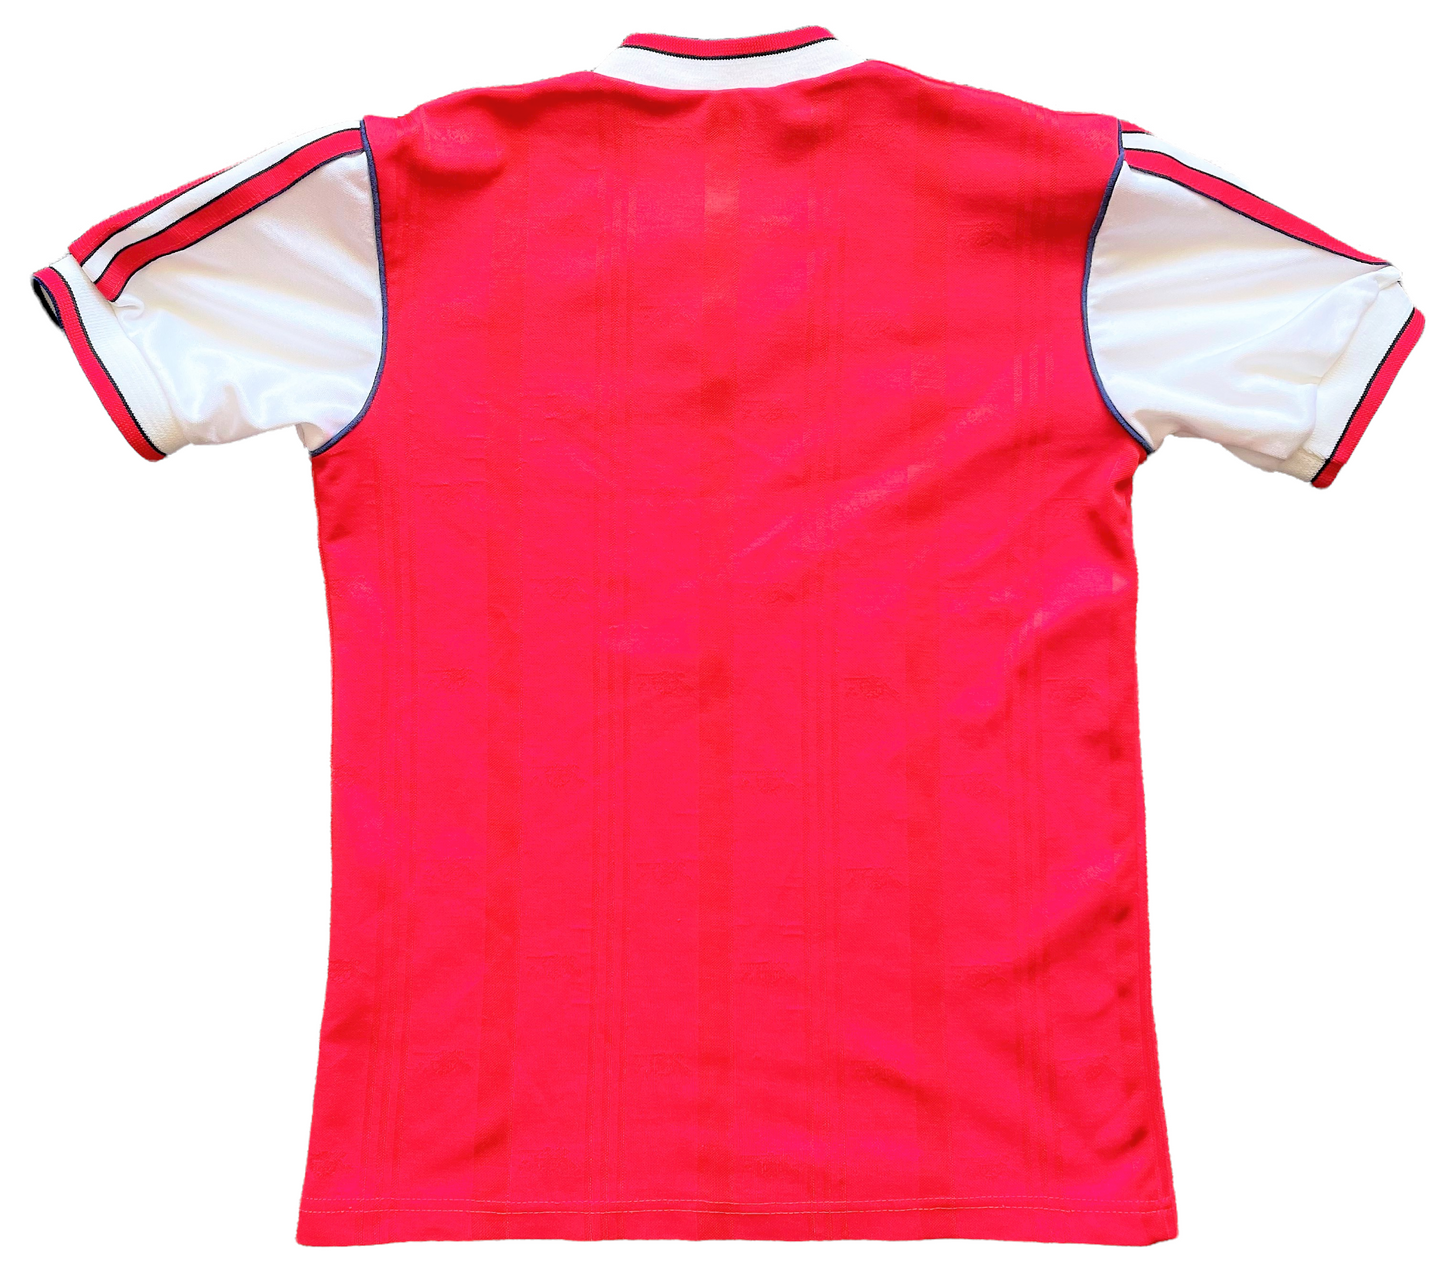 Arsenal 1986 Home Shirt (very good) Large Boys on tag modern day Small Boys. Height 16 inches